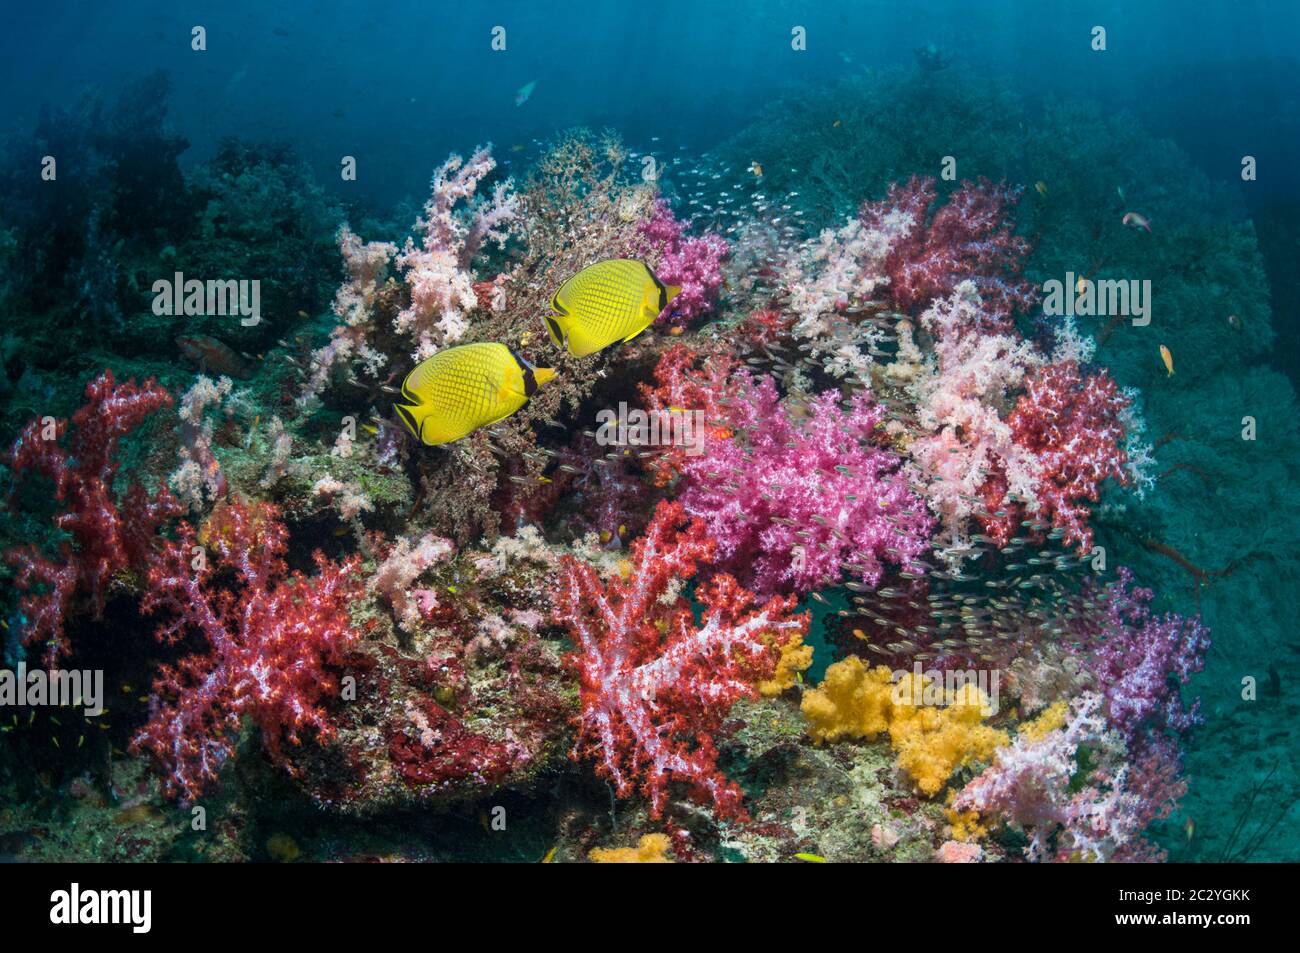 Coral reef scenery with Latticed butterflyfish (Chaetodon rafflesi) swimming over soft corals.  Andaman Sea, Thailand. Stock Photo